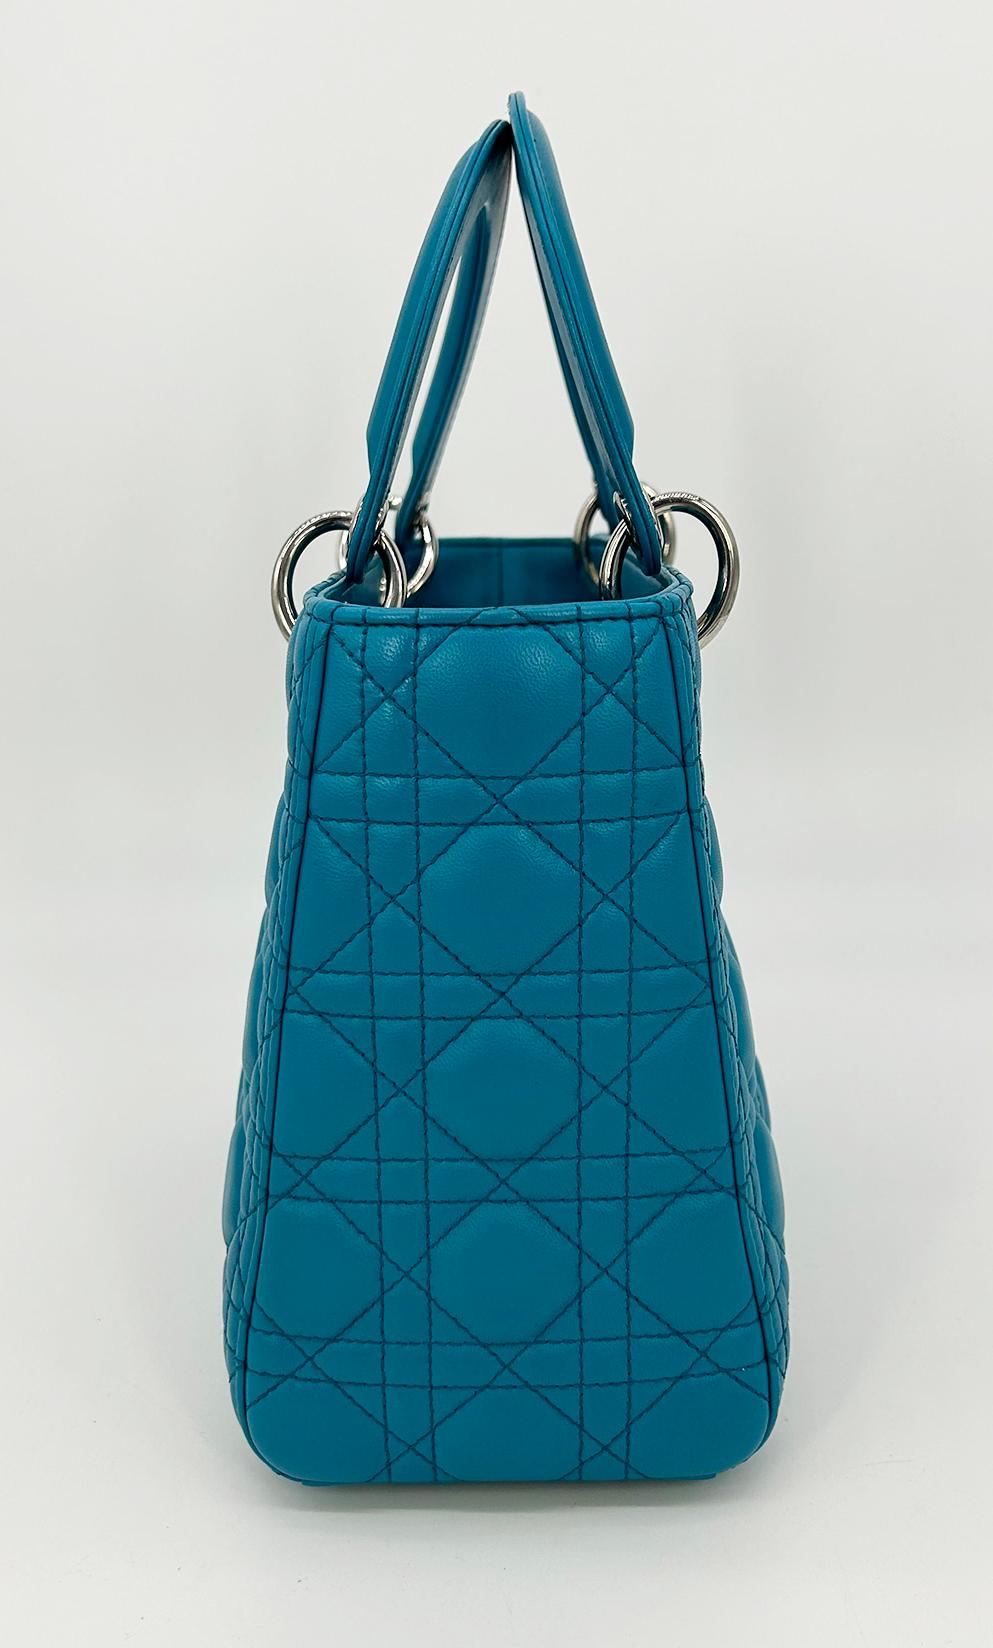 Christian Dior Teal Leather Cannage Medium Lady Di Bag In Excellent Condition For Sale In Philadelphia, PA